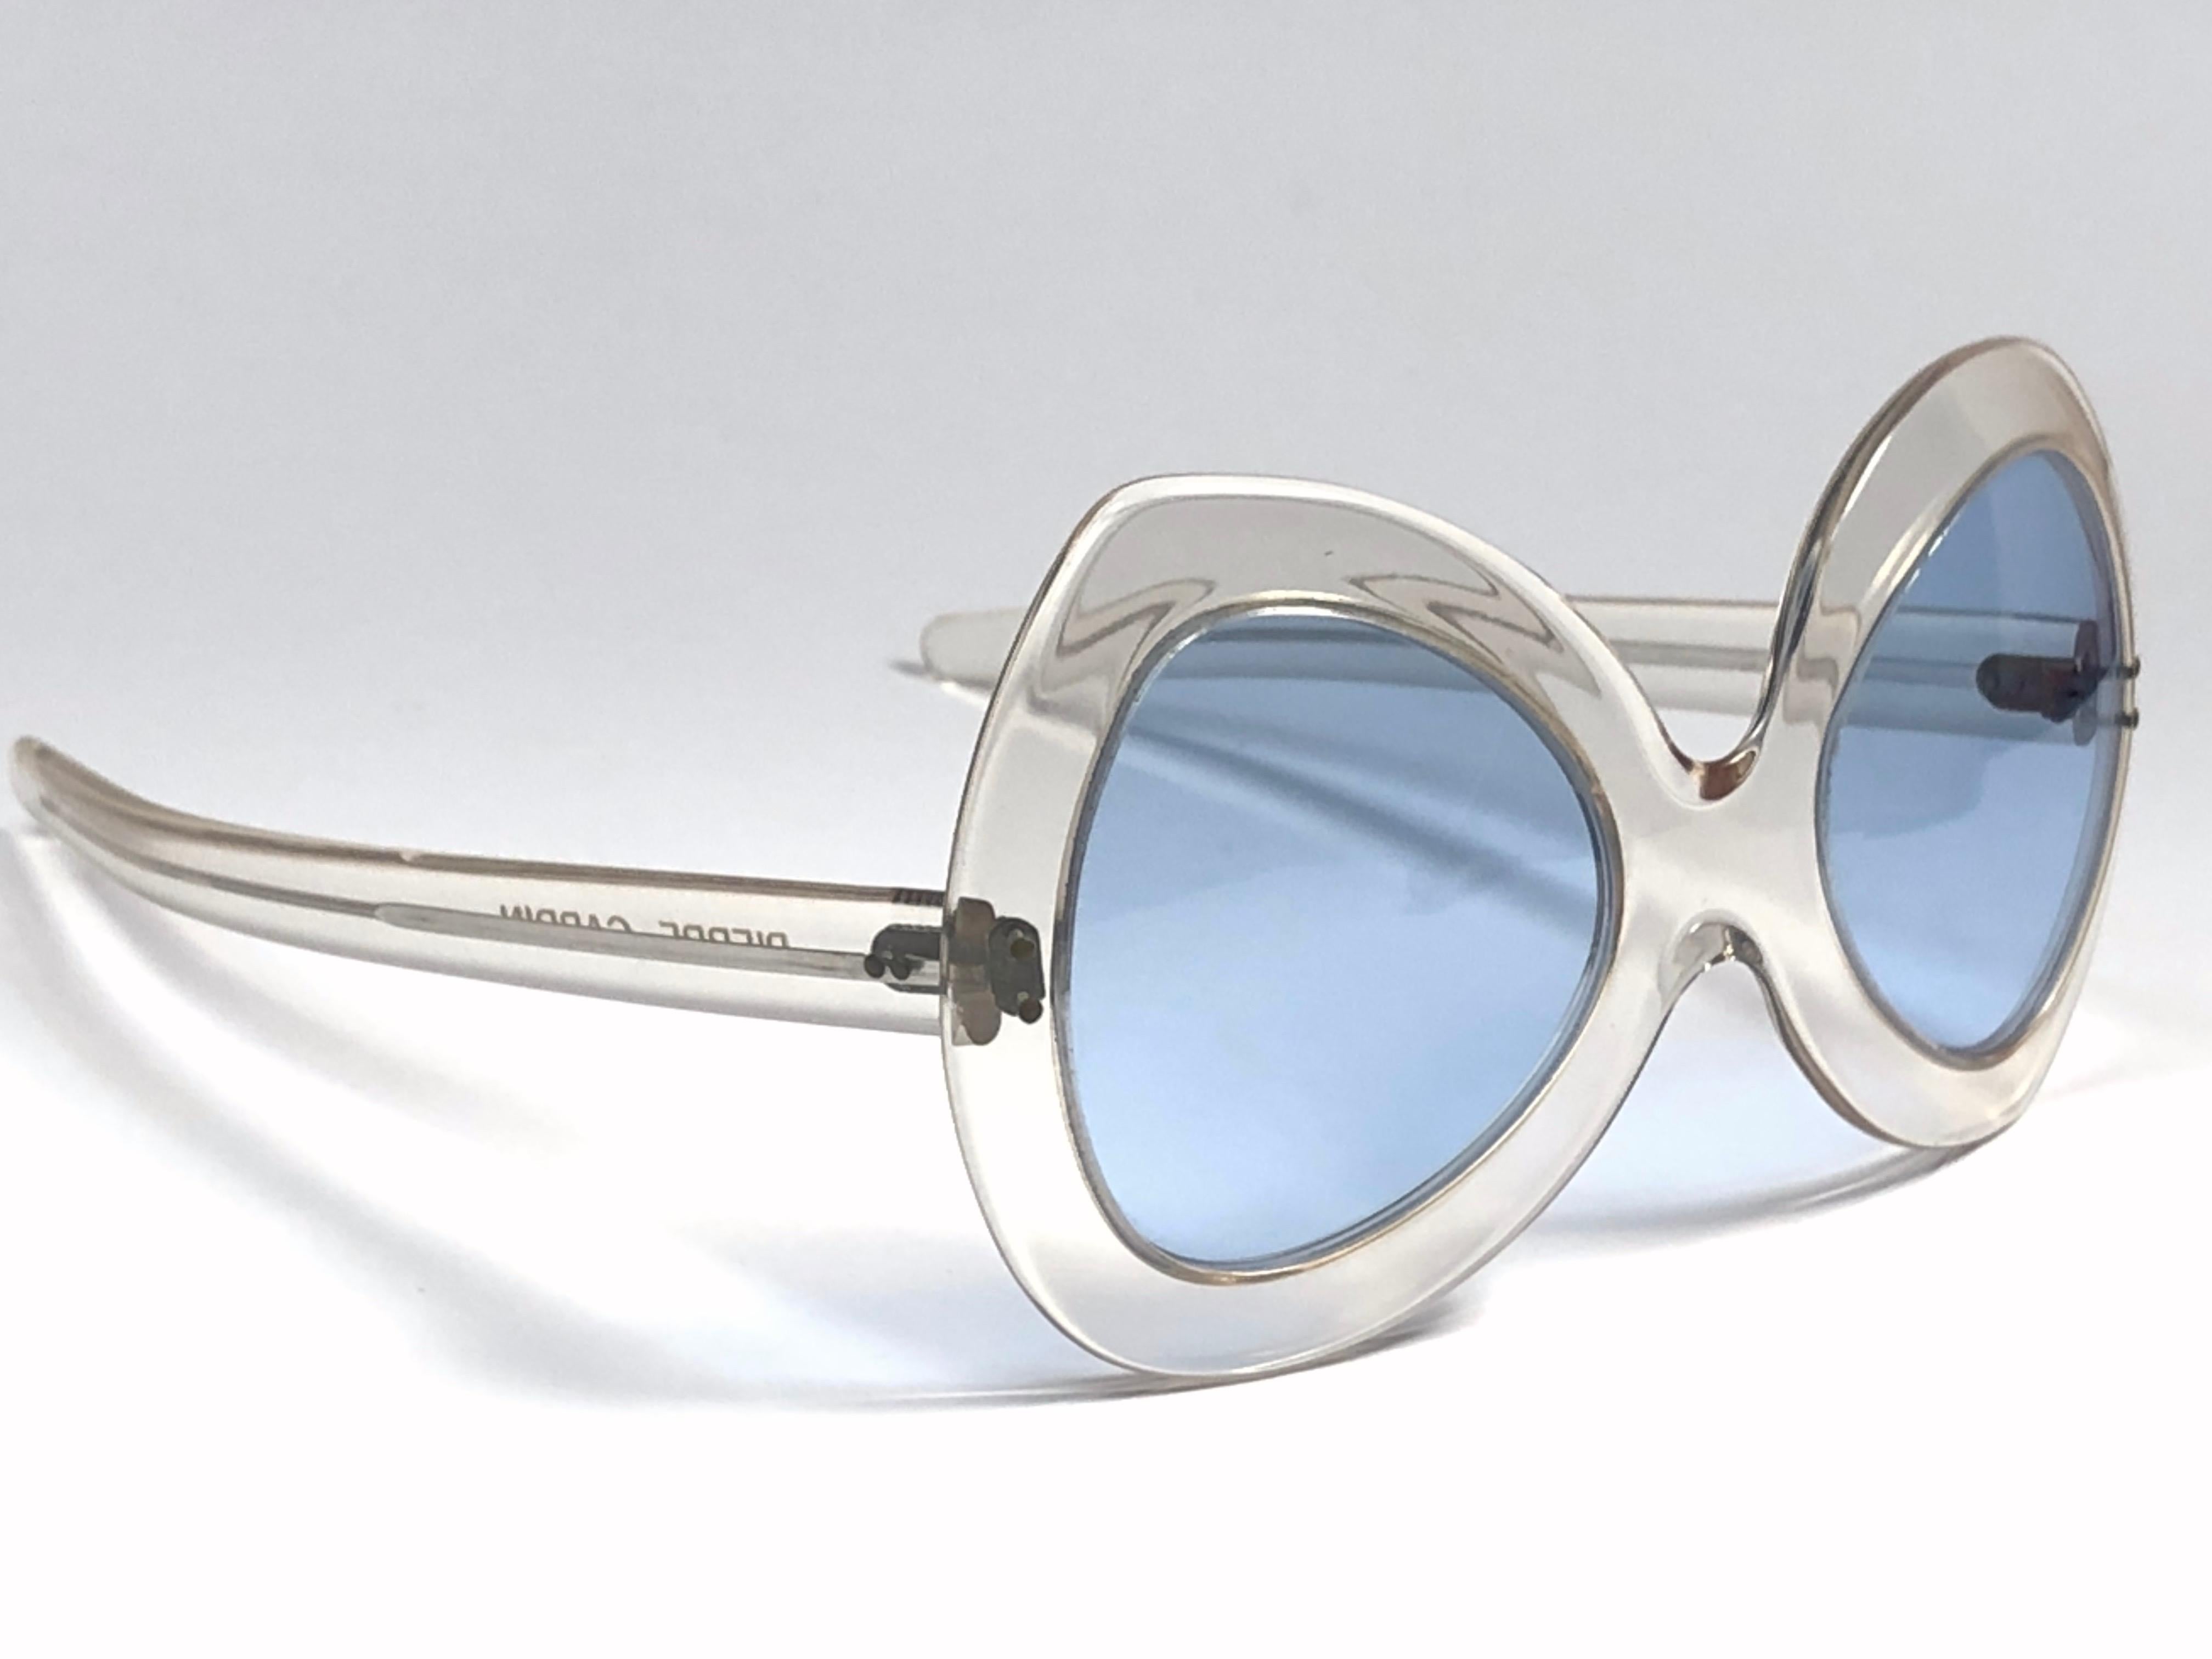 Vintage new Pierre Cardin Oversized translucent frame sporting a pair of bluelenses. Designed and produced in the 1960’s.   

This pair of vintage Pierre Cardin is a collectors must have. A piece of sunglasses and fashion history.

This frame is in